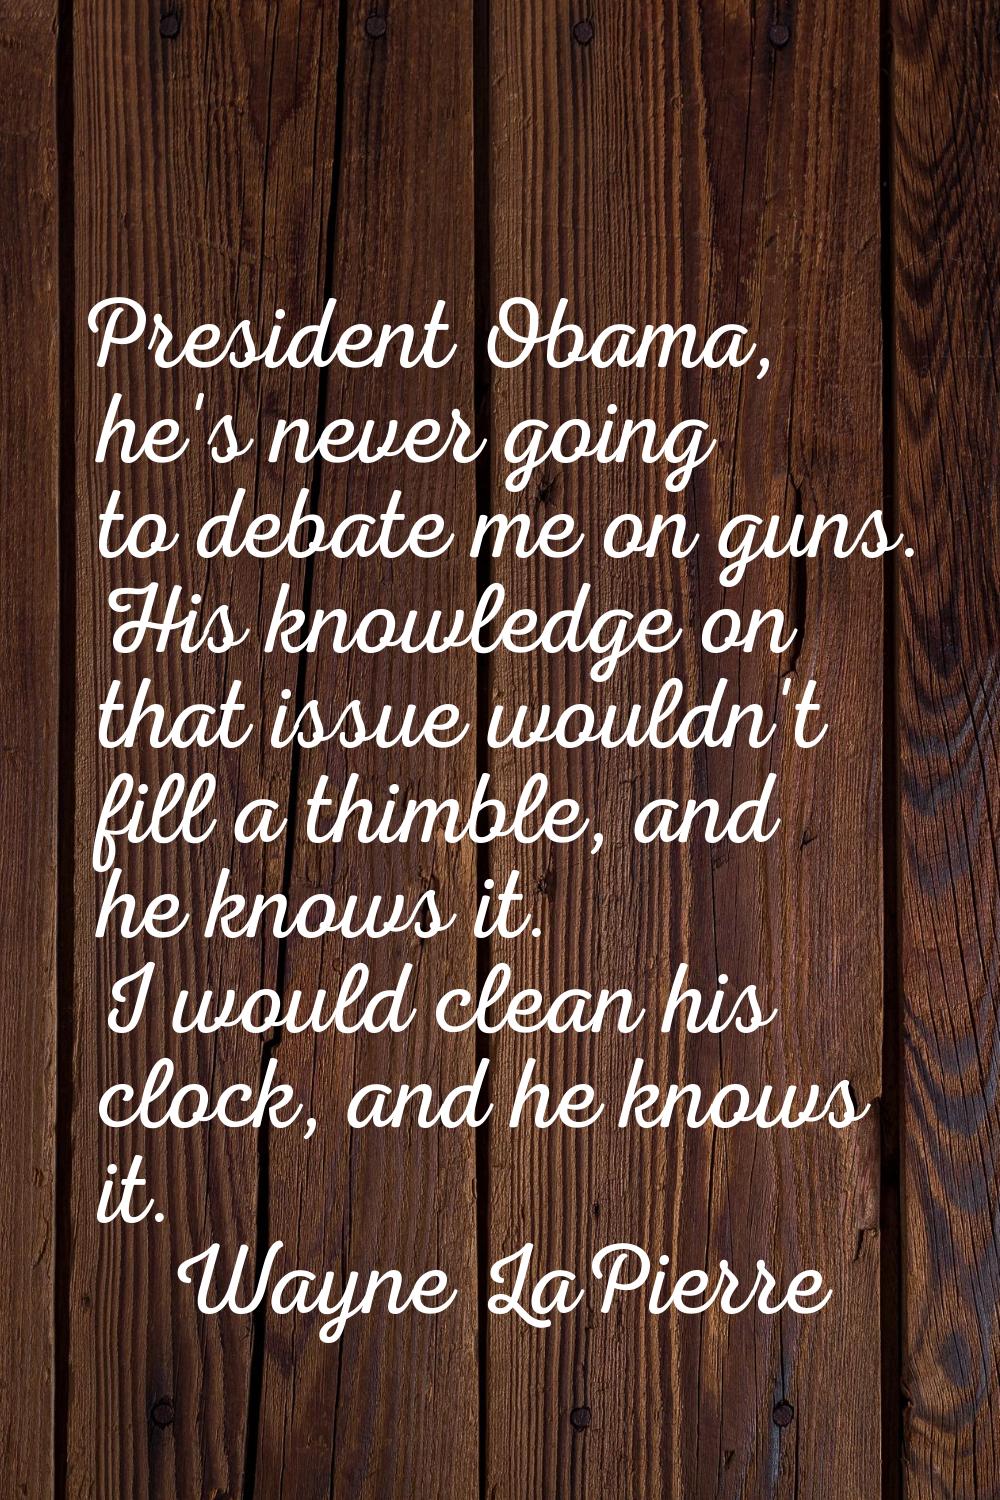 President Obama, he's never going to debate me on guns. His knowledge on that issue wouldn't fill a